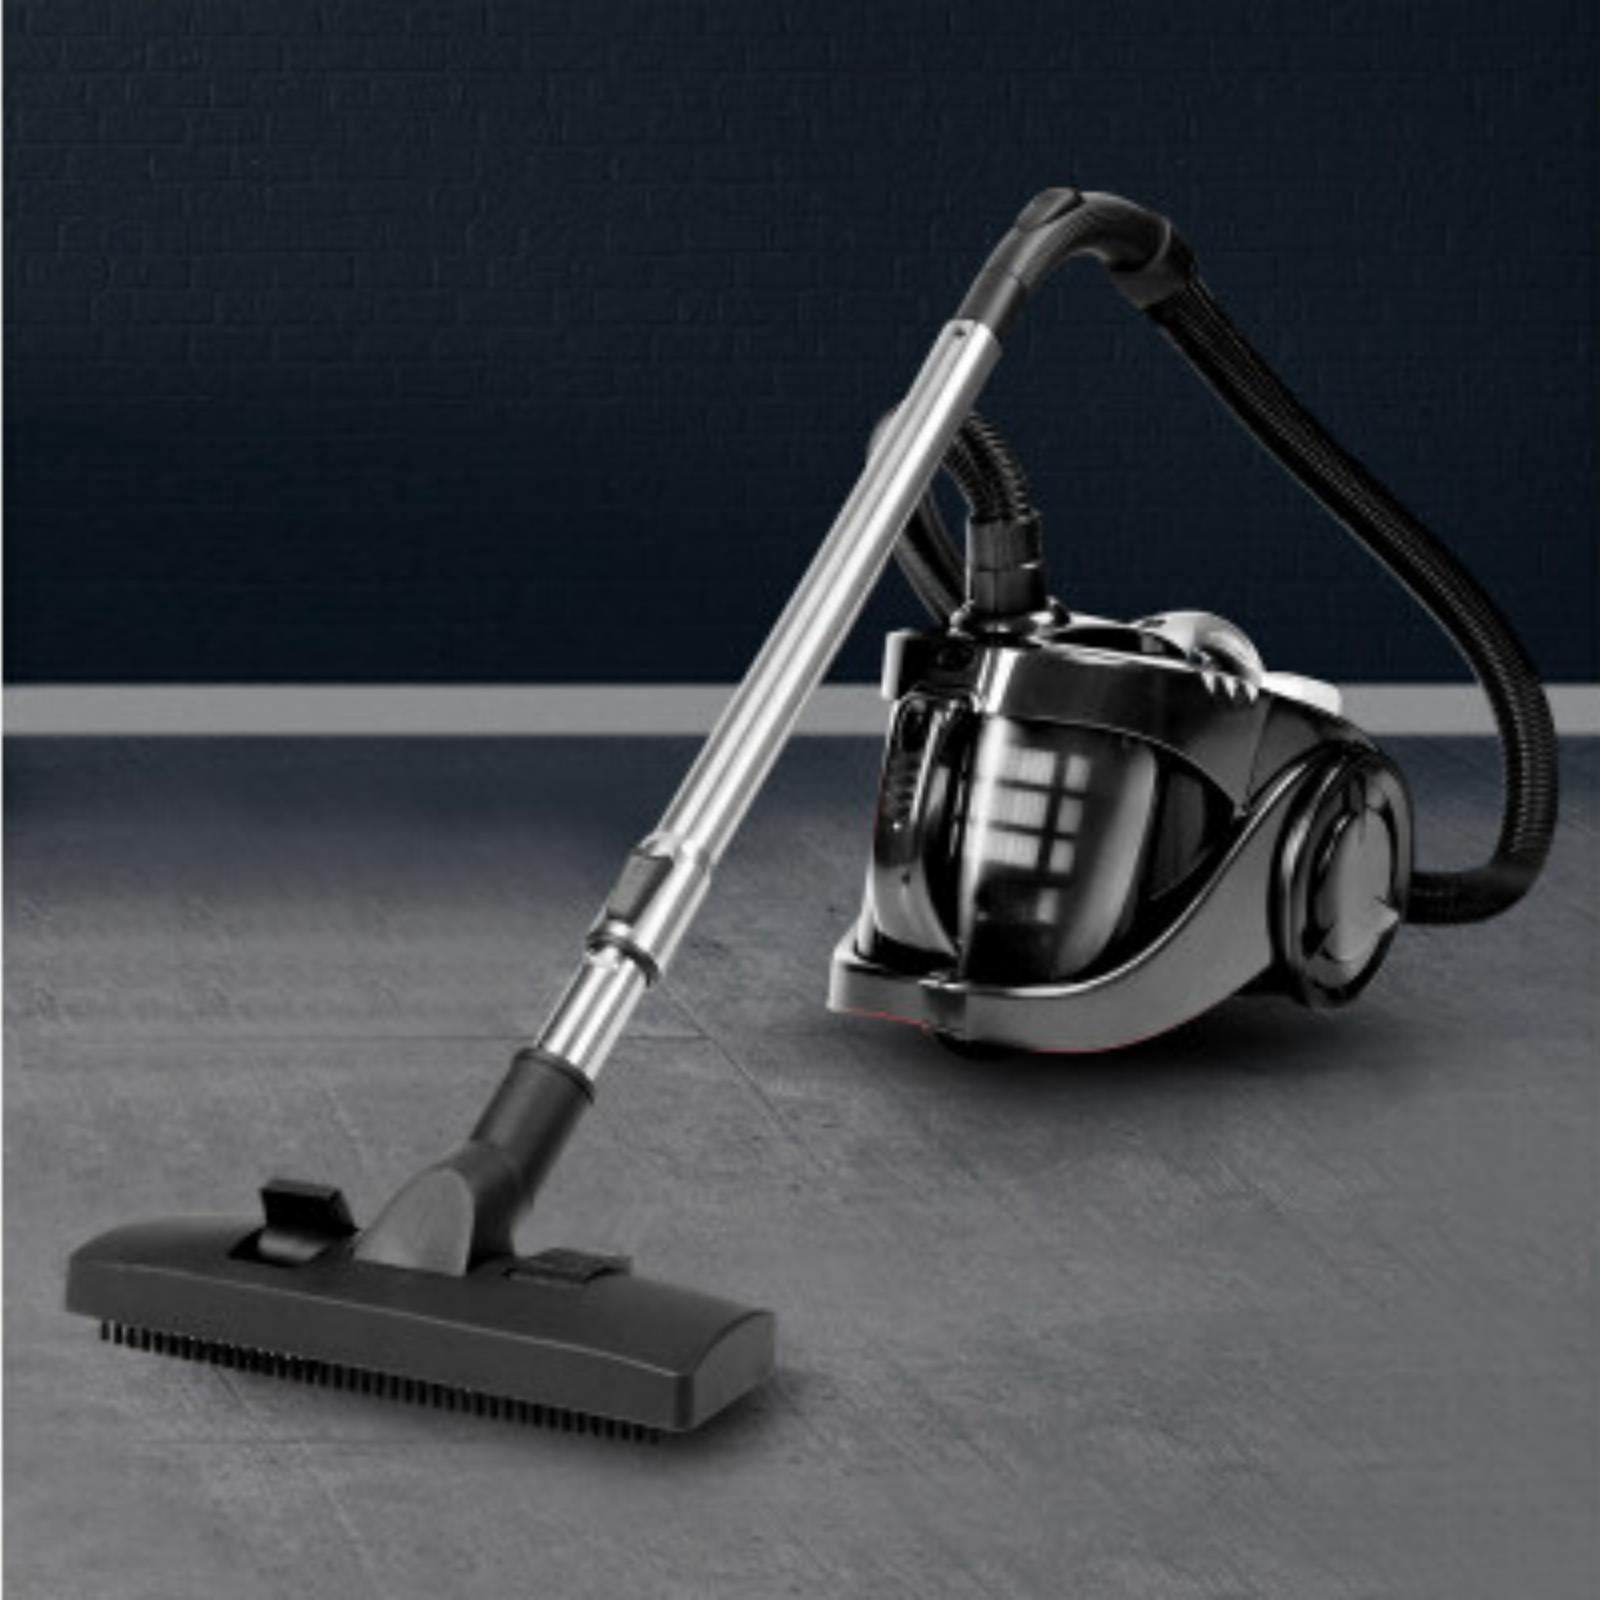 Bagless Vacuum Cleaner features 2-in-1 adjustable nozzle suitable for carpet, rugs, hard flooring, upholstery, curtains